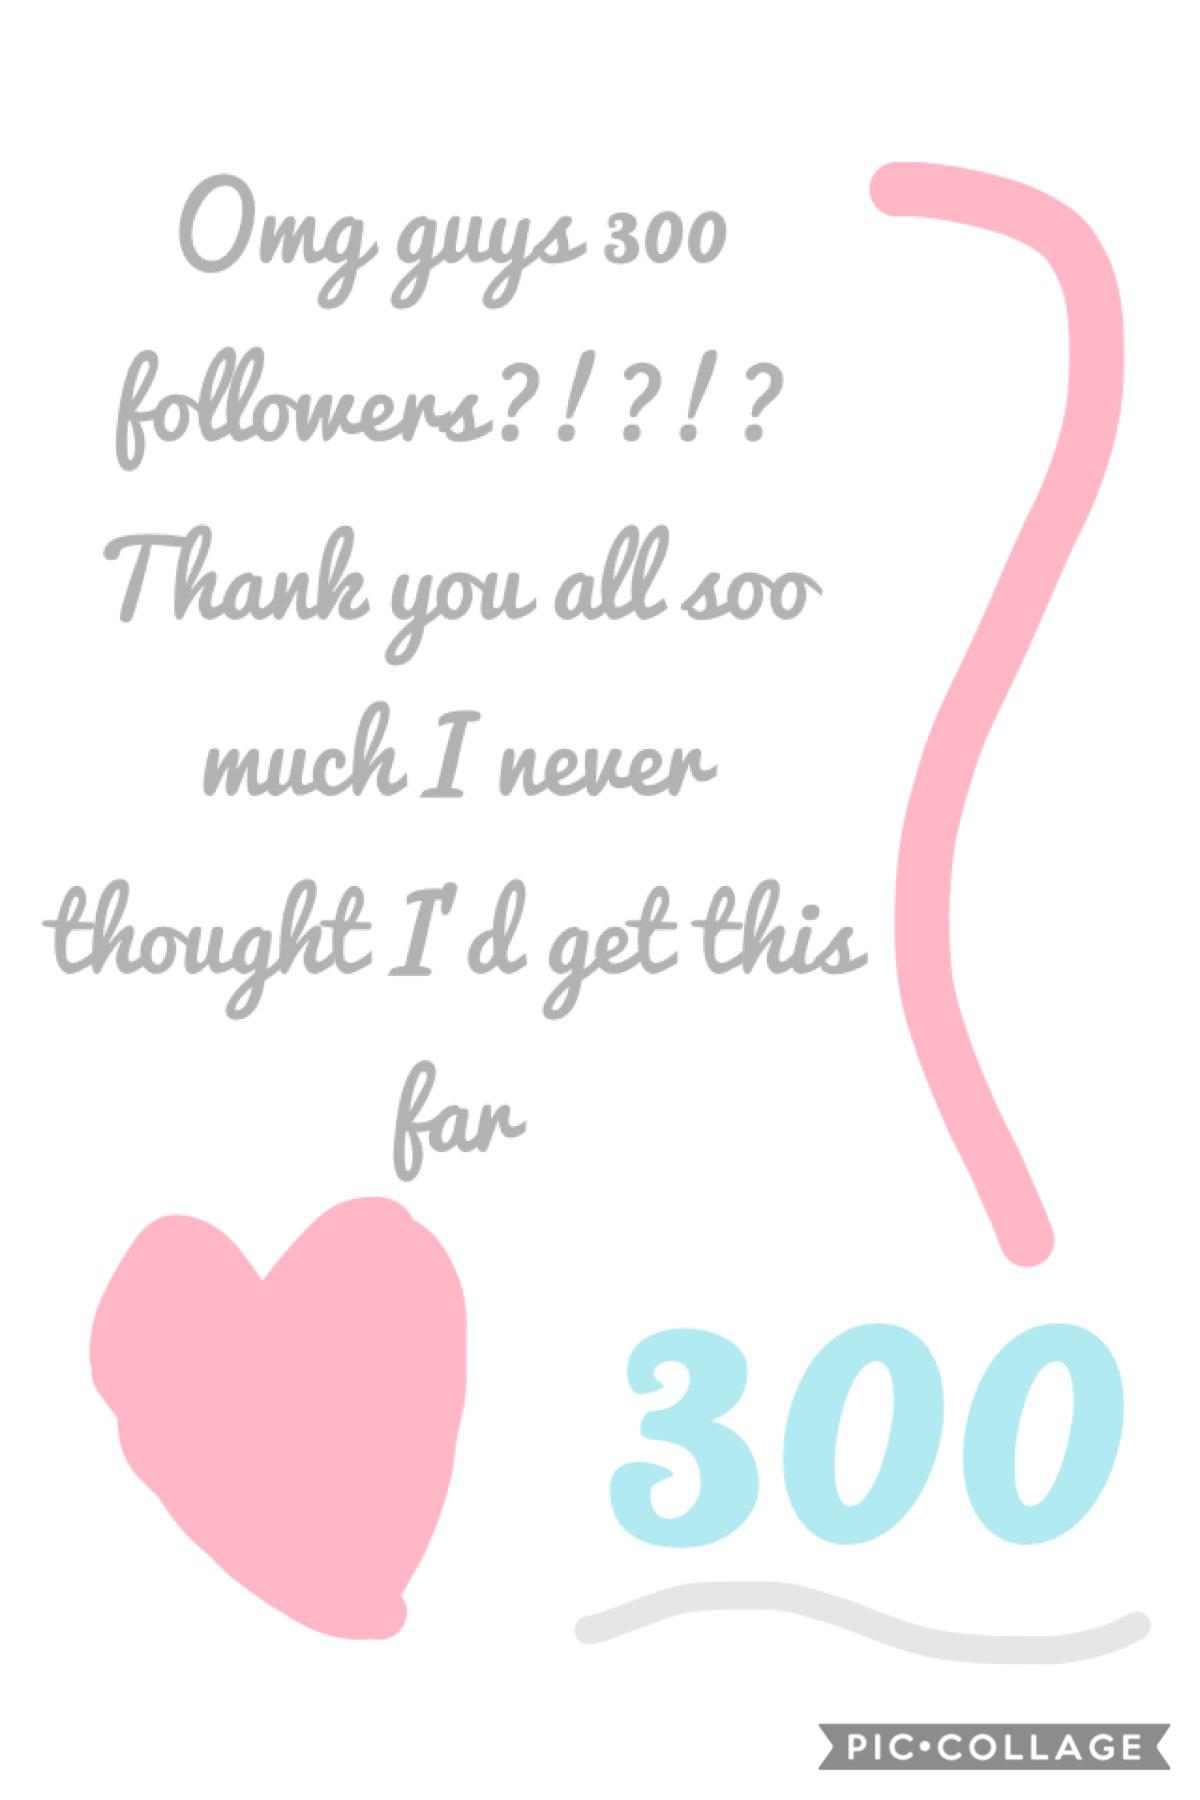 300?? Tysmmmm!!!! Also sorry for the quick edit...